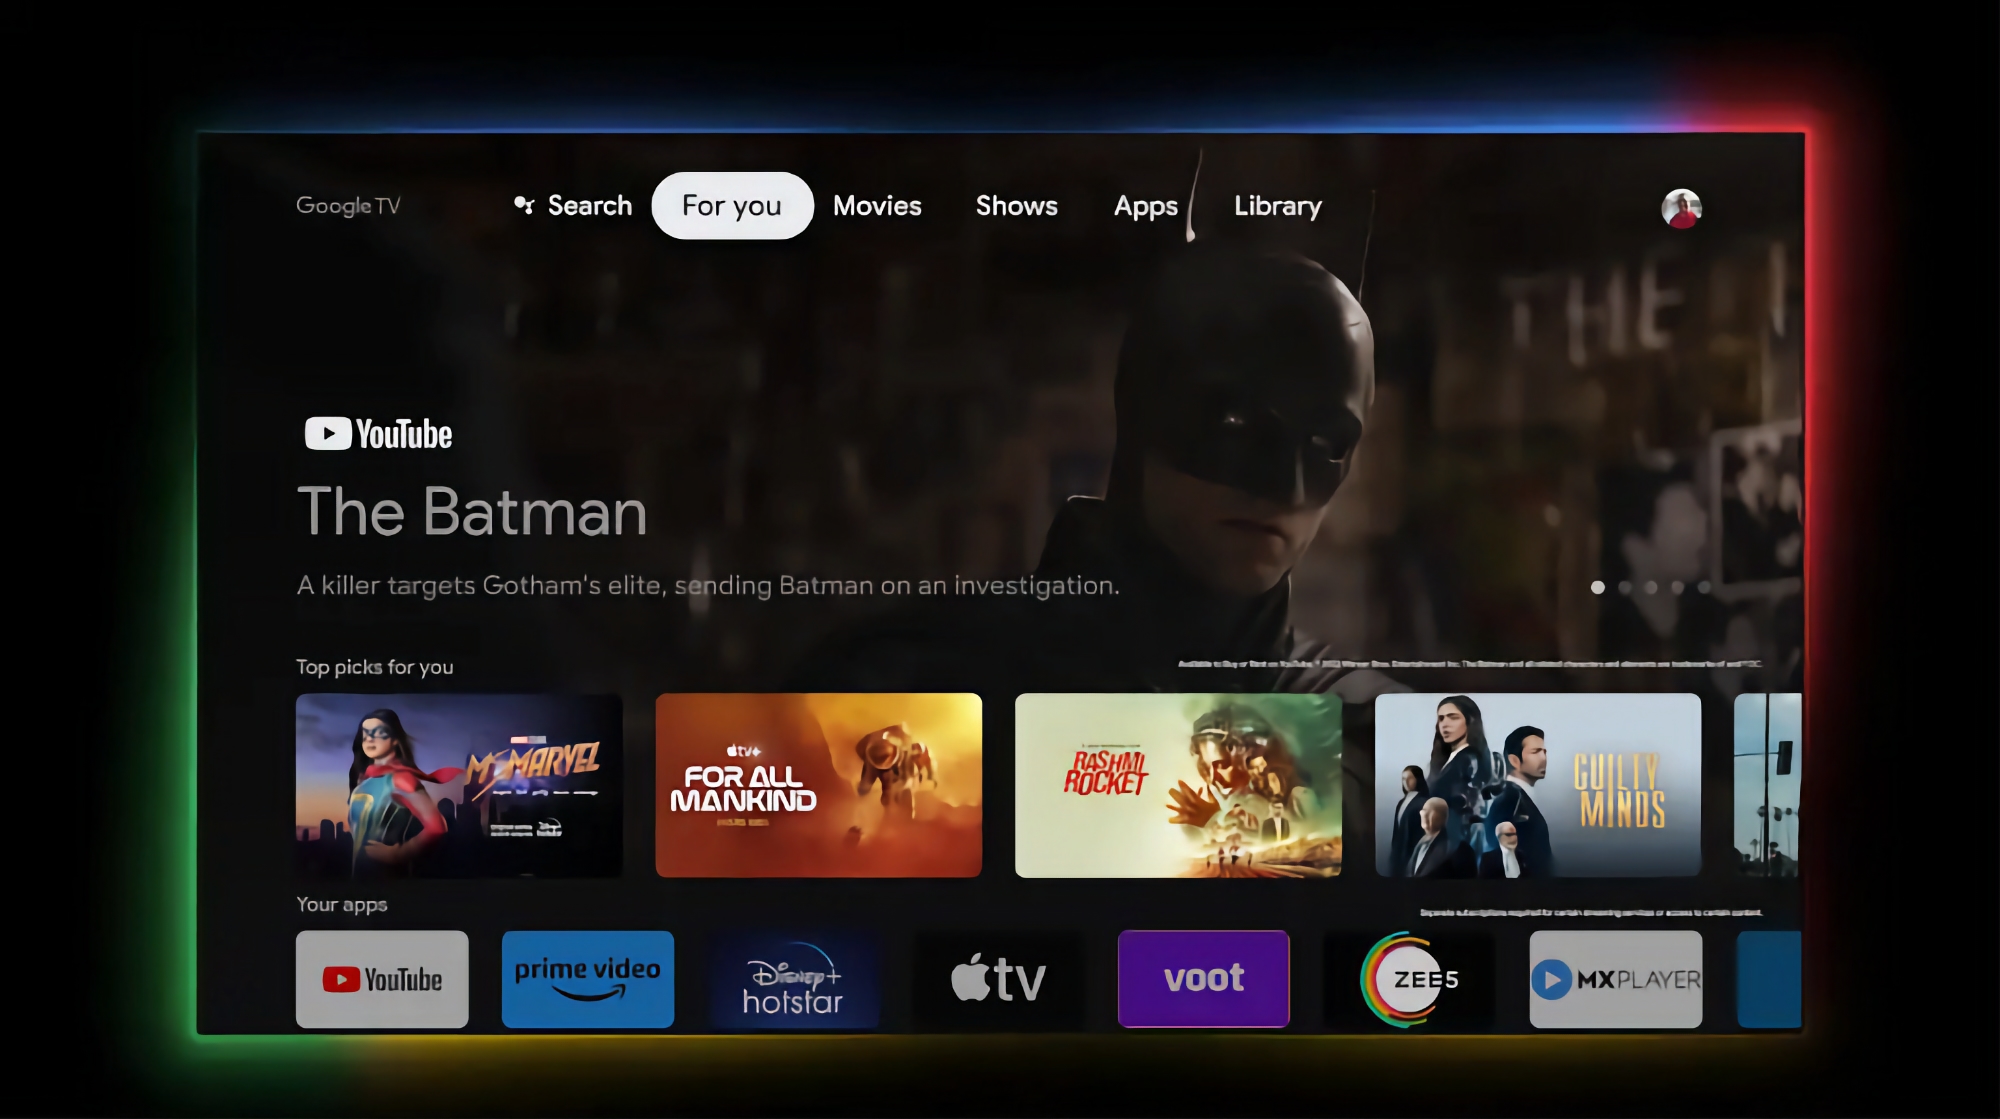 Following Android 13 Beta 3: Google announces Android TV 14 for smart TVs